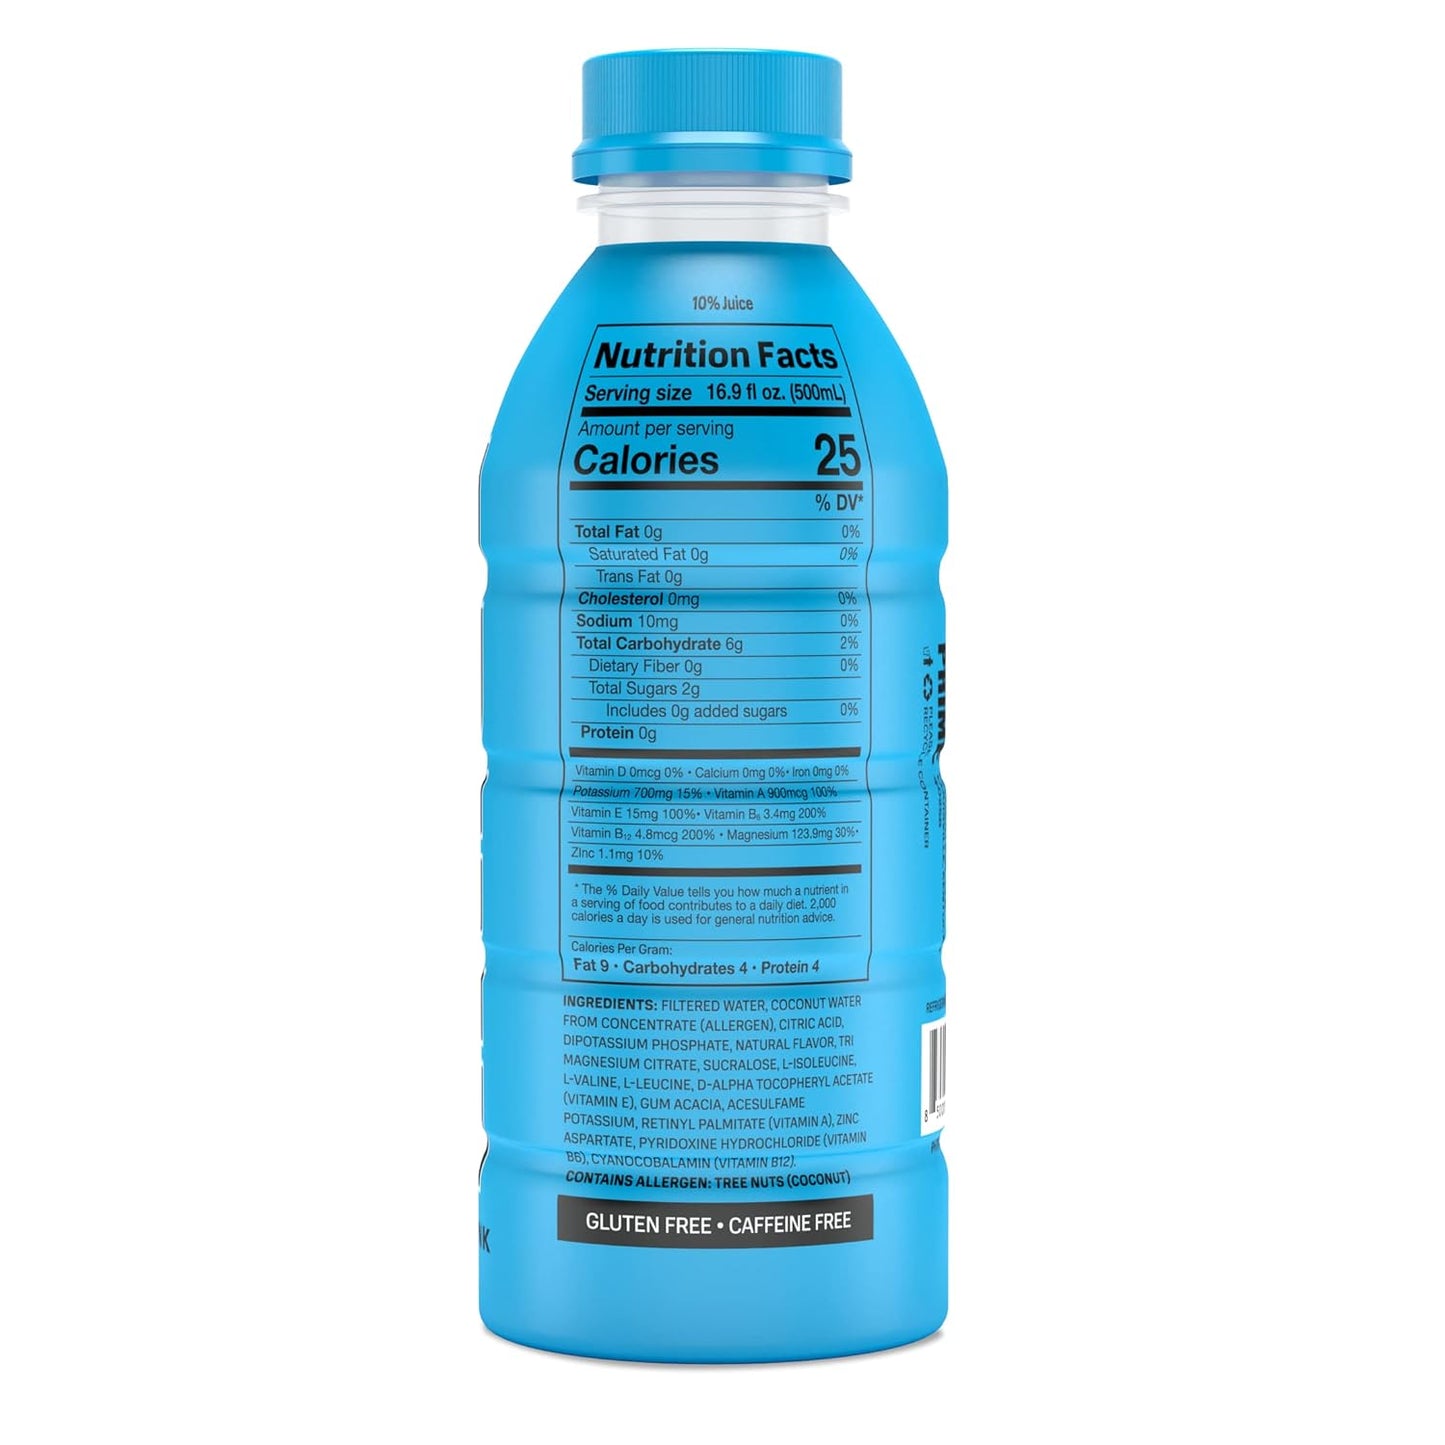 Prime Hydration with BCAA Blend for Muscle Recovery - Blue Raspberry (12 Drinks, 16 Fl Oz. Each)